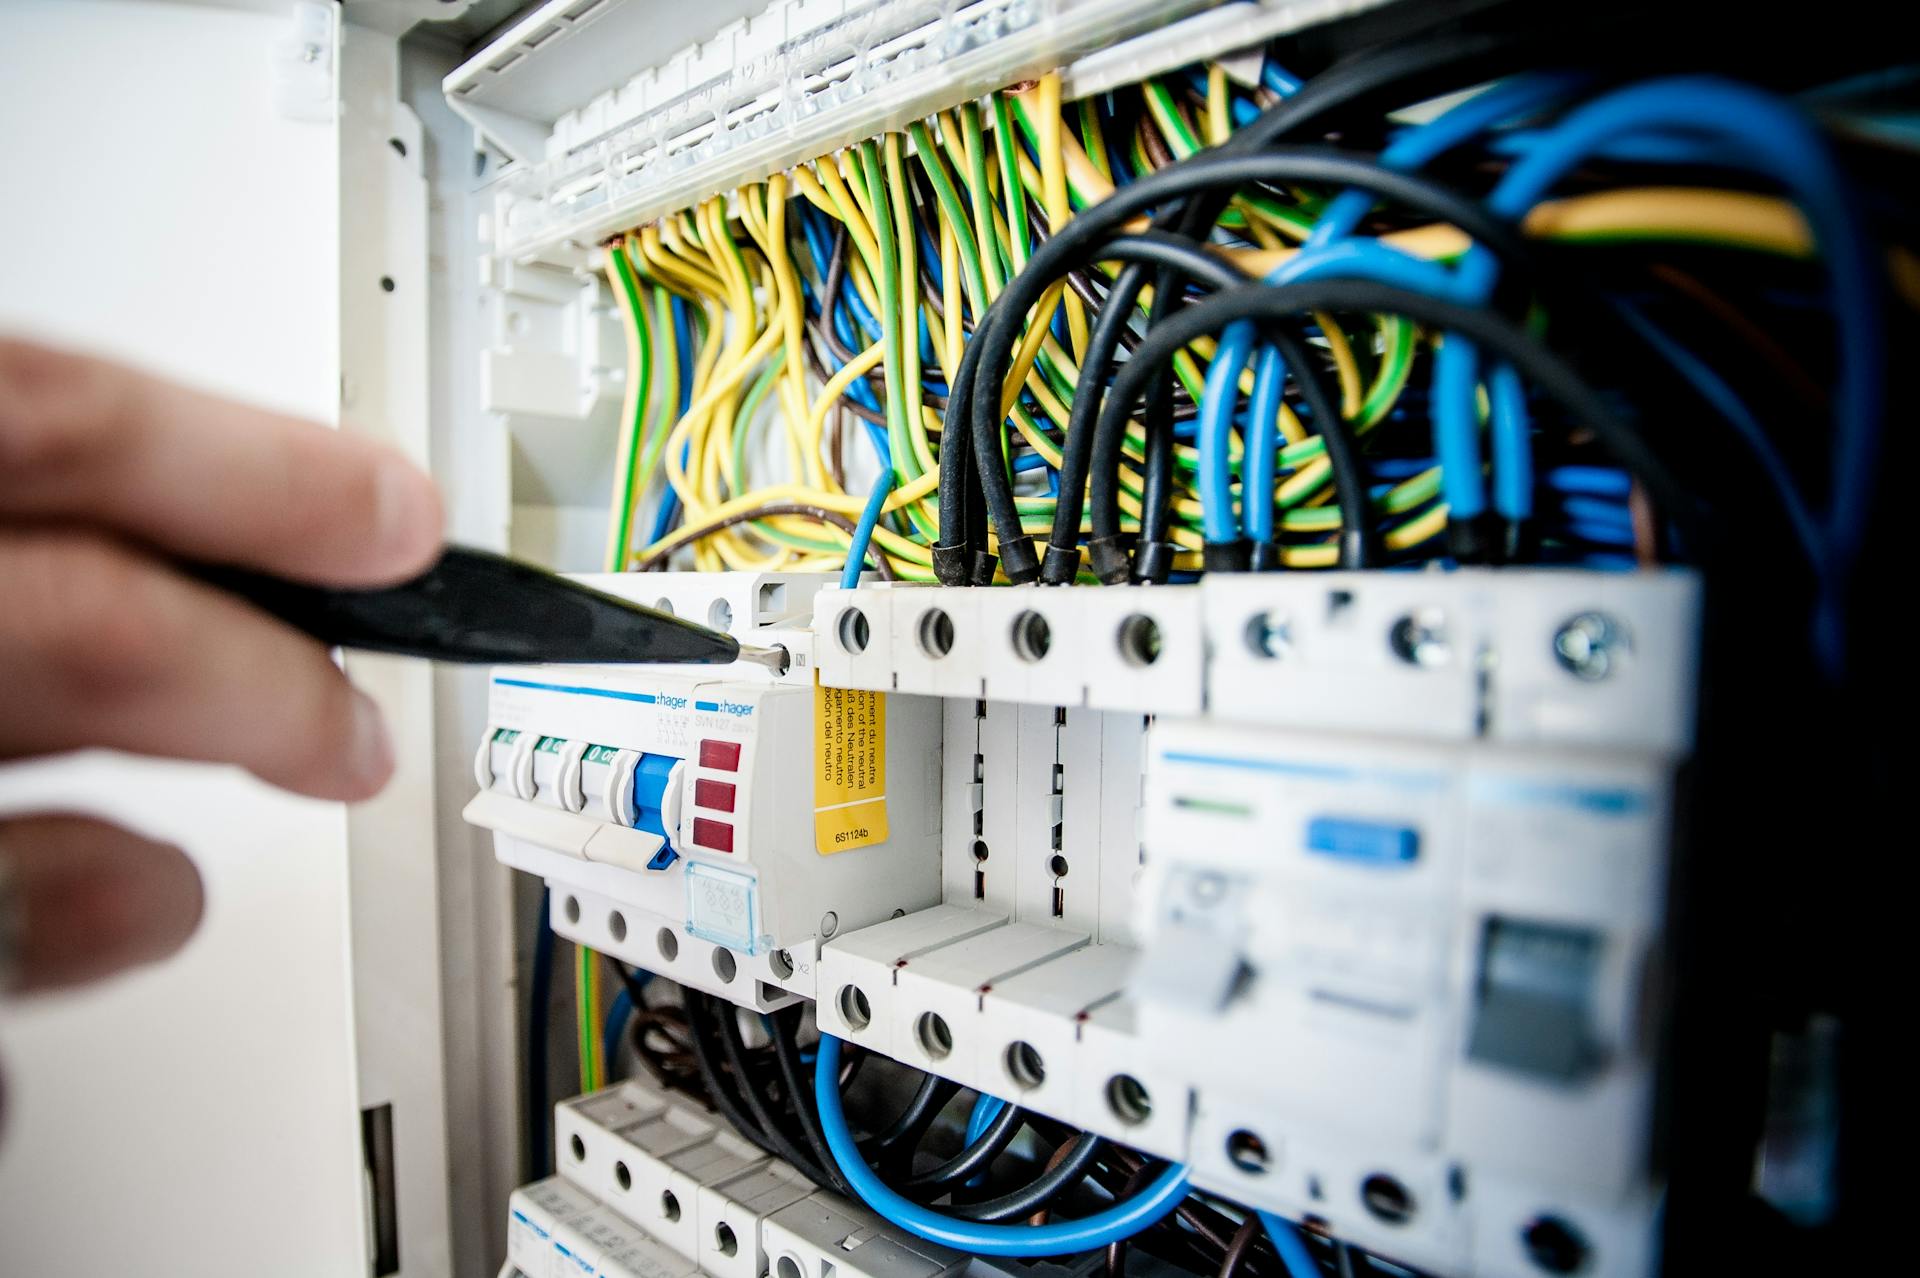 7 Electrical Safety Practices Every Homeowner Should Know